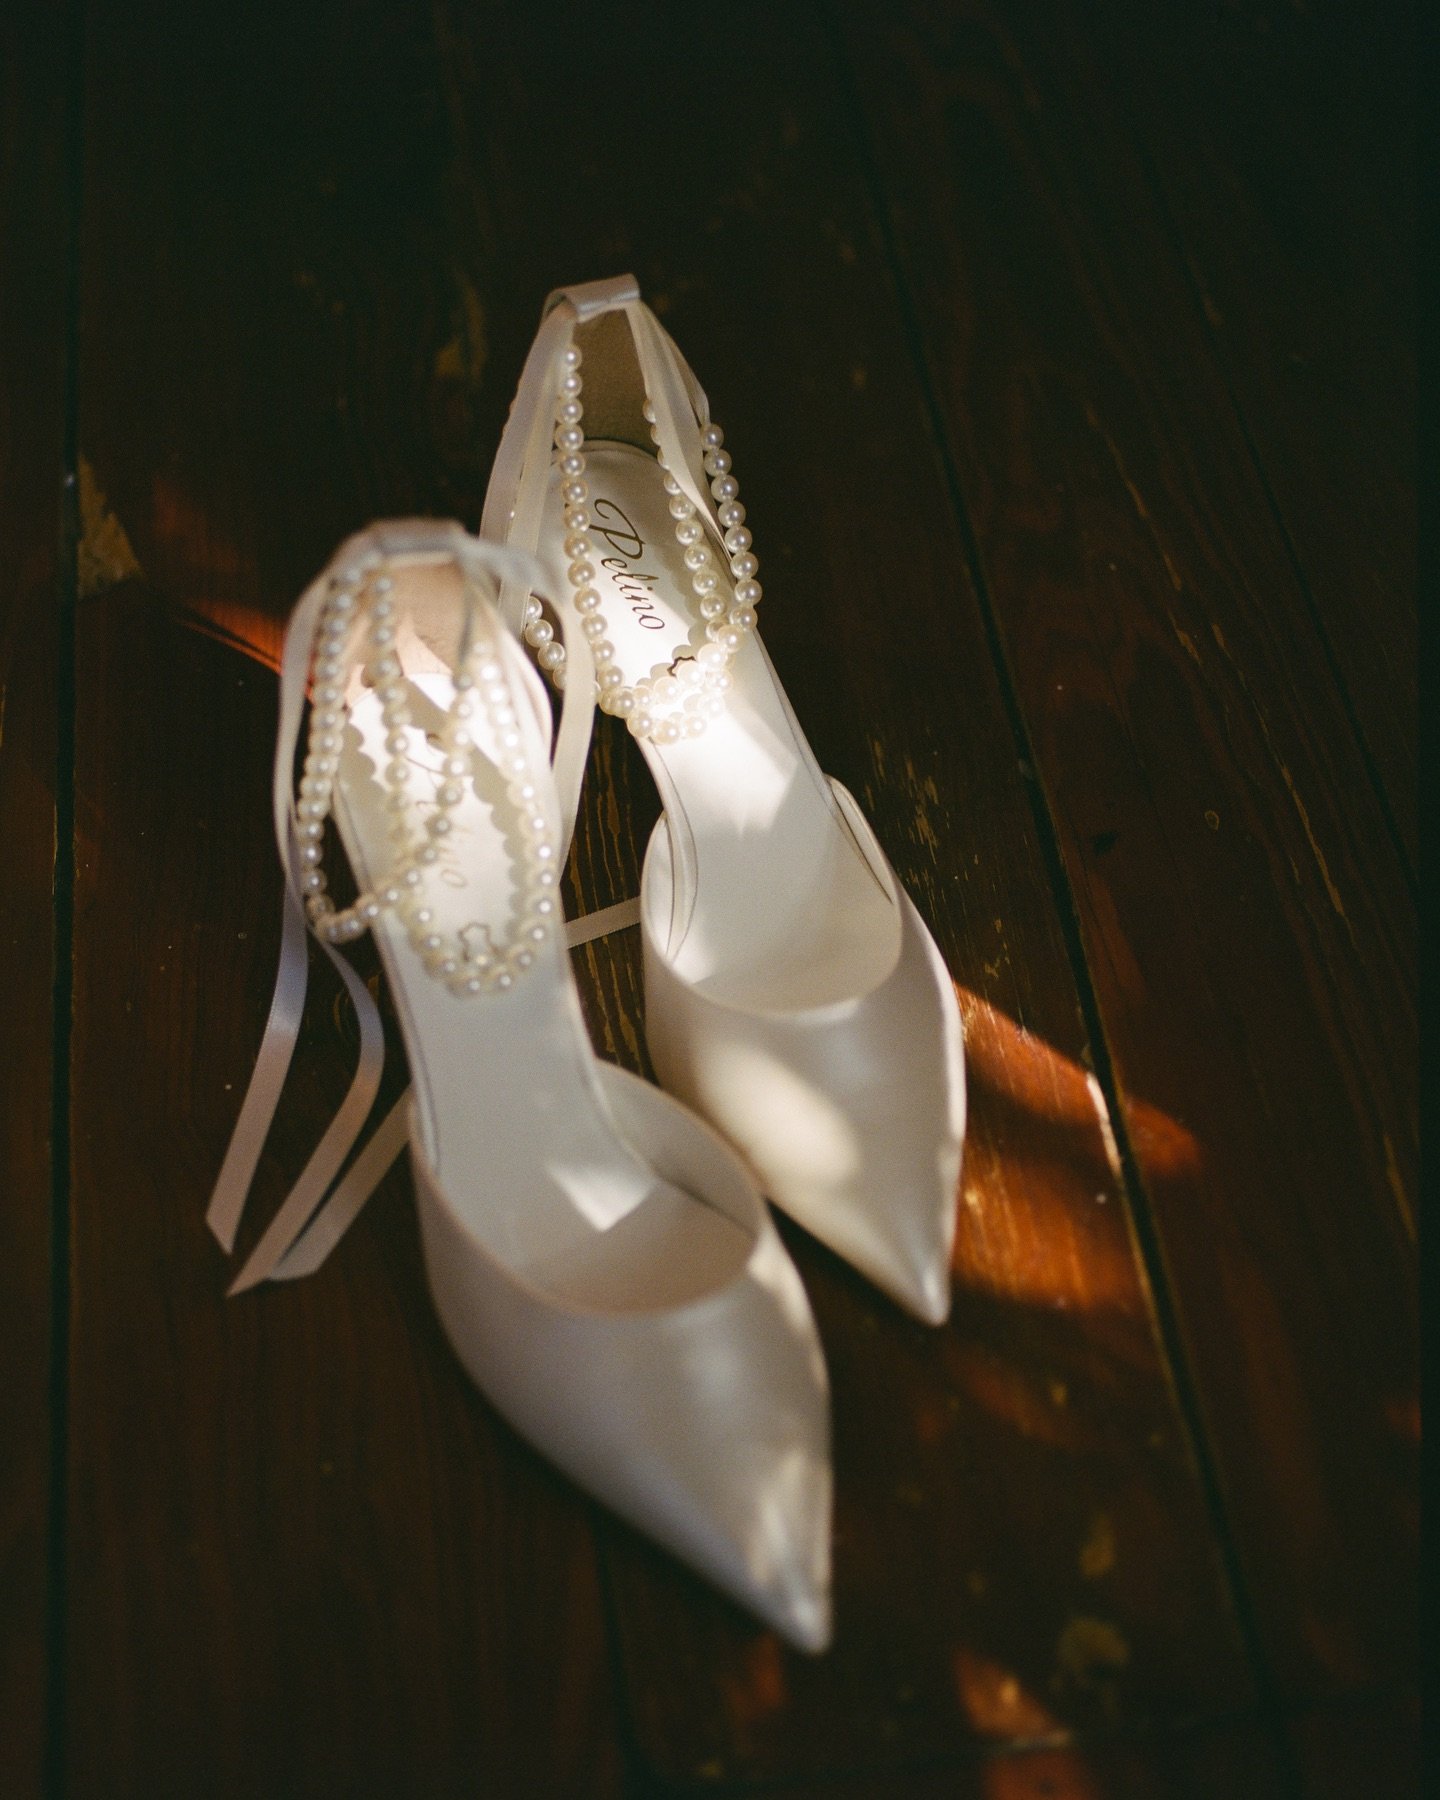 I am such a whore for pretty shoe pics. 

Shot in my Pentax 645n with Portra 400.

.

.

.

.
#virginiaweddingphotographer #pentax645n #filmisnotdead #kodakportra400 #portra400 #dcweddingphotographer #virginiabride#richmondweddingphotographer #richmo